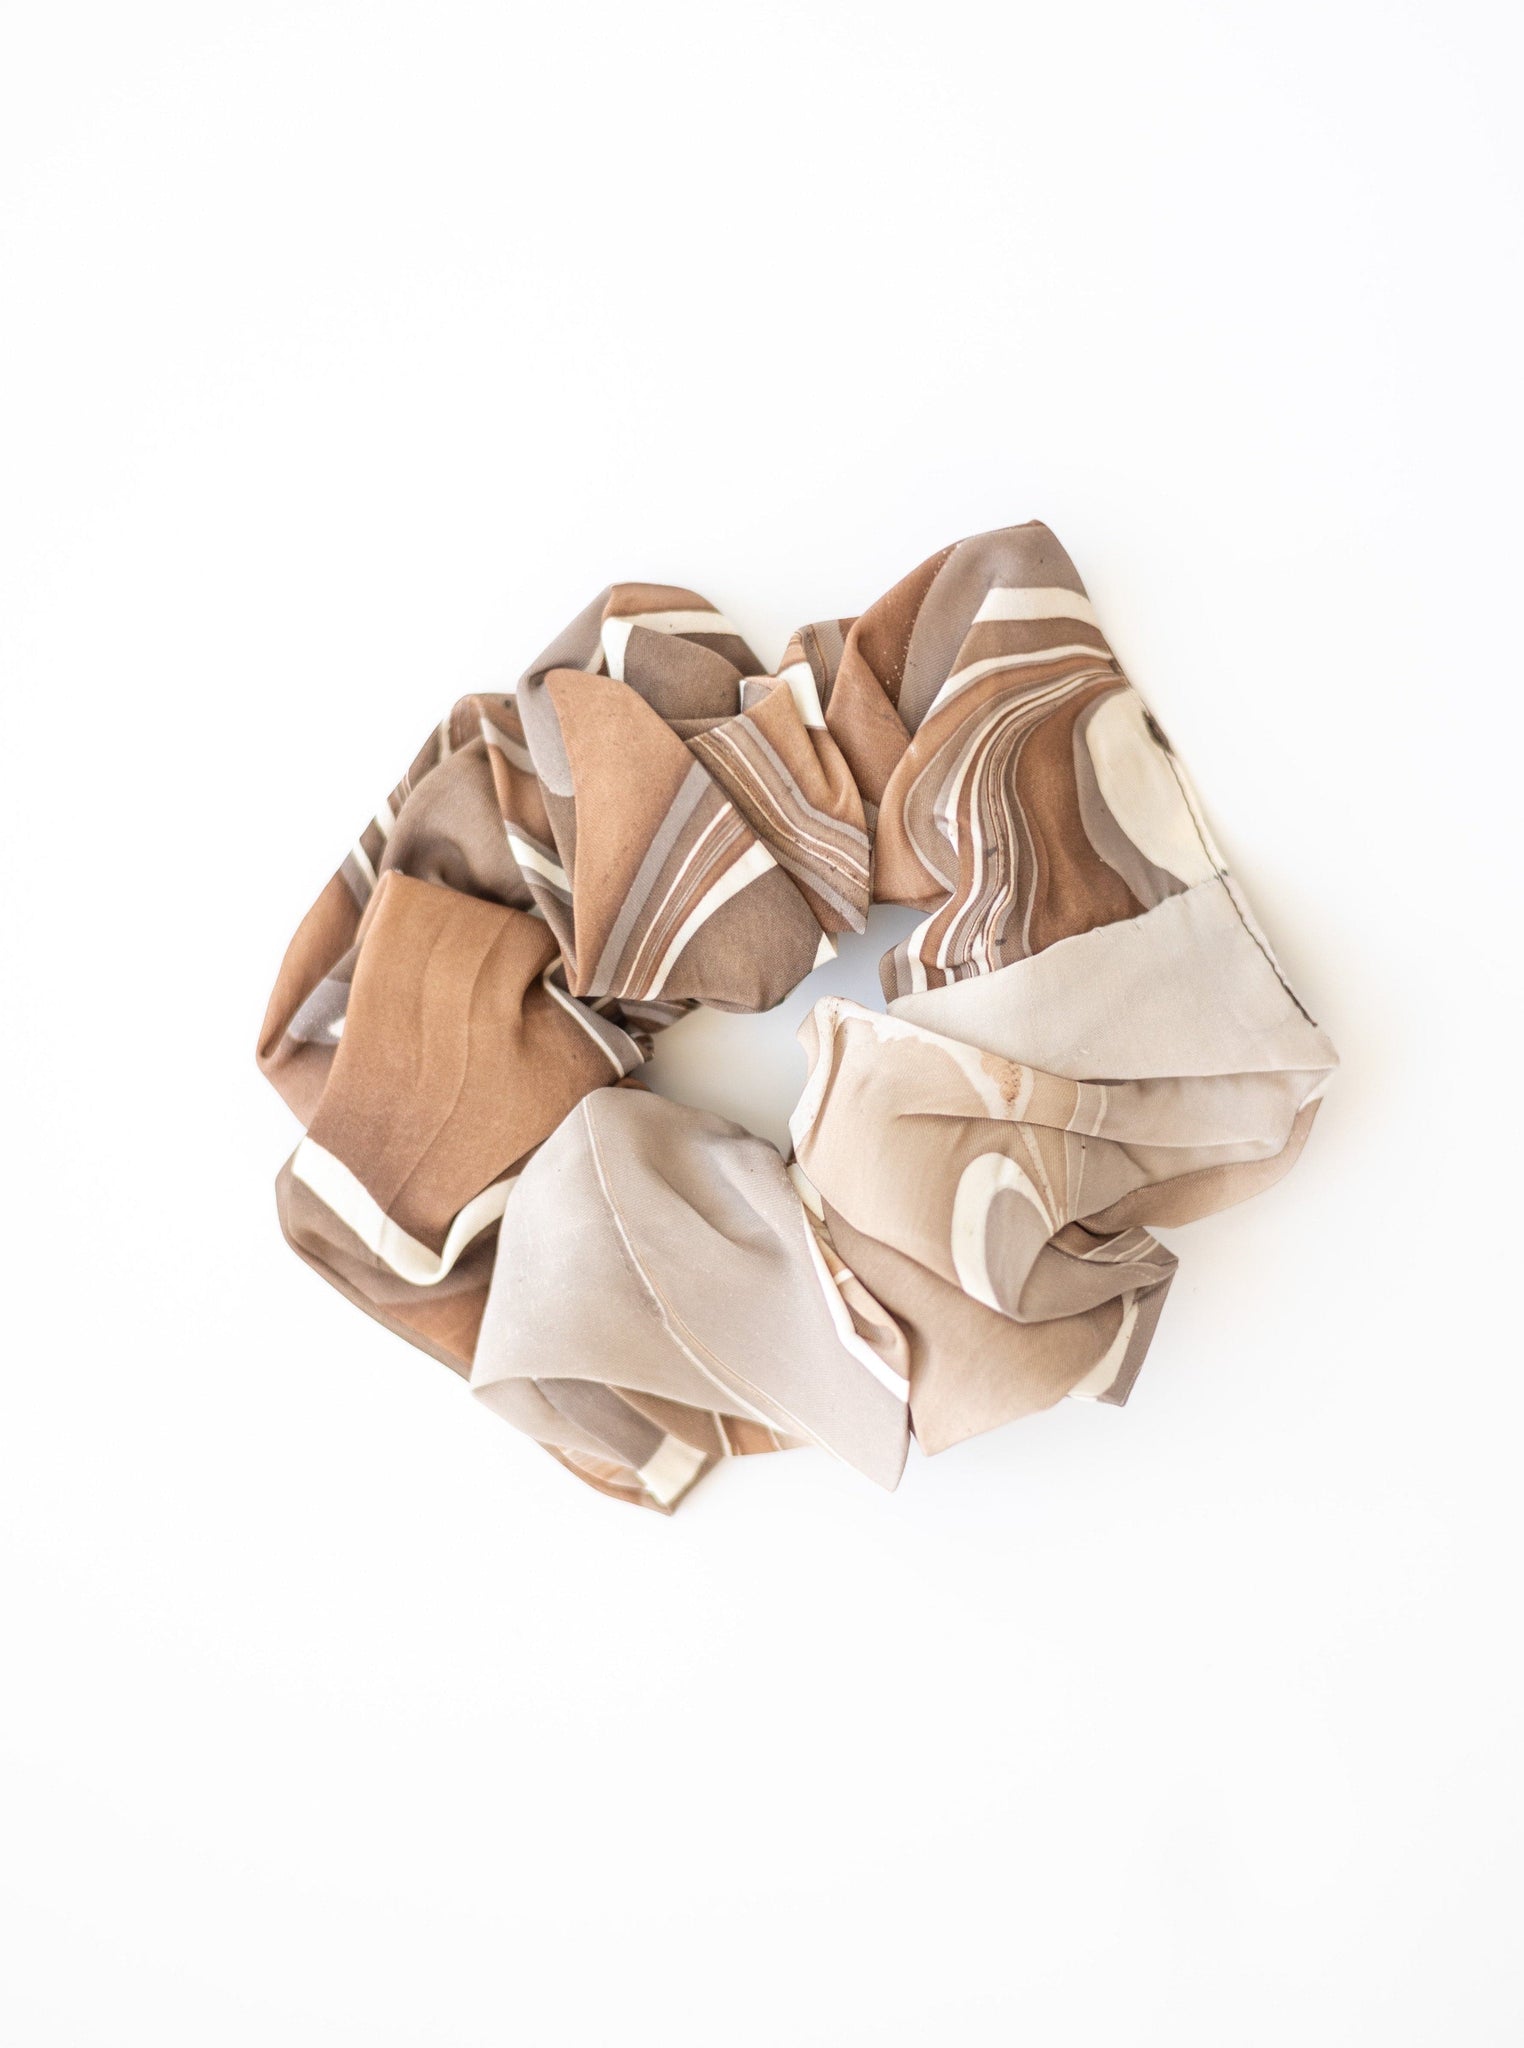 A brown and white Large Scrunchy - Hand Marble made from remnant fabrics on a white surface.